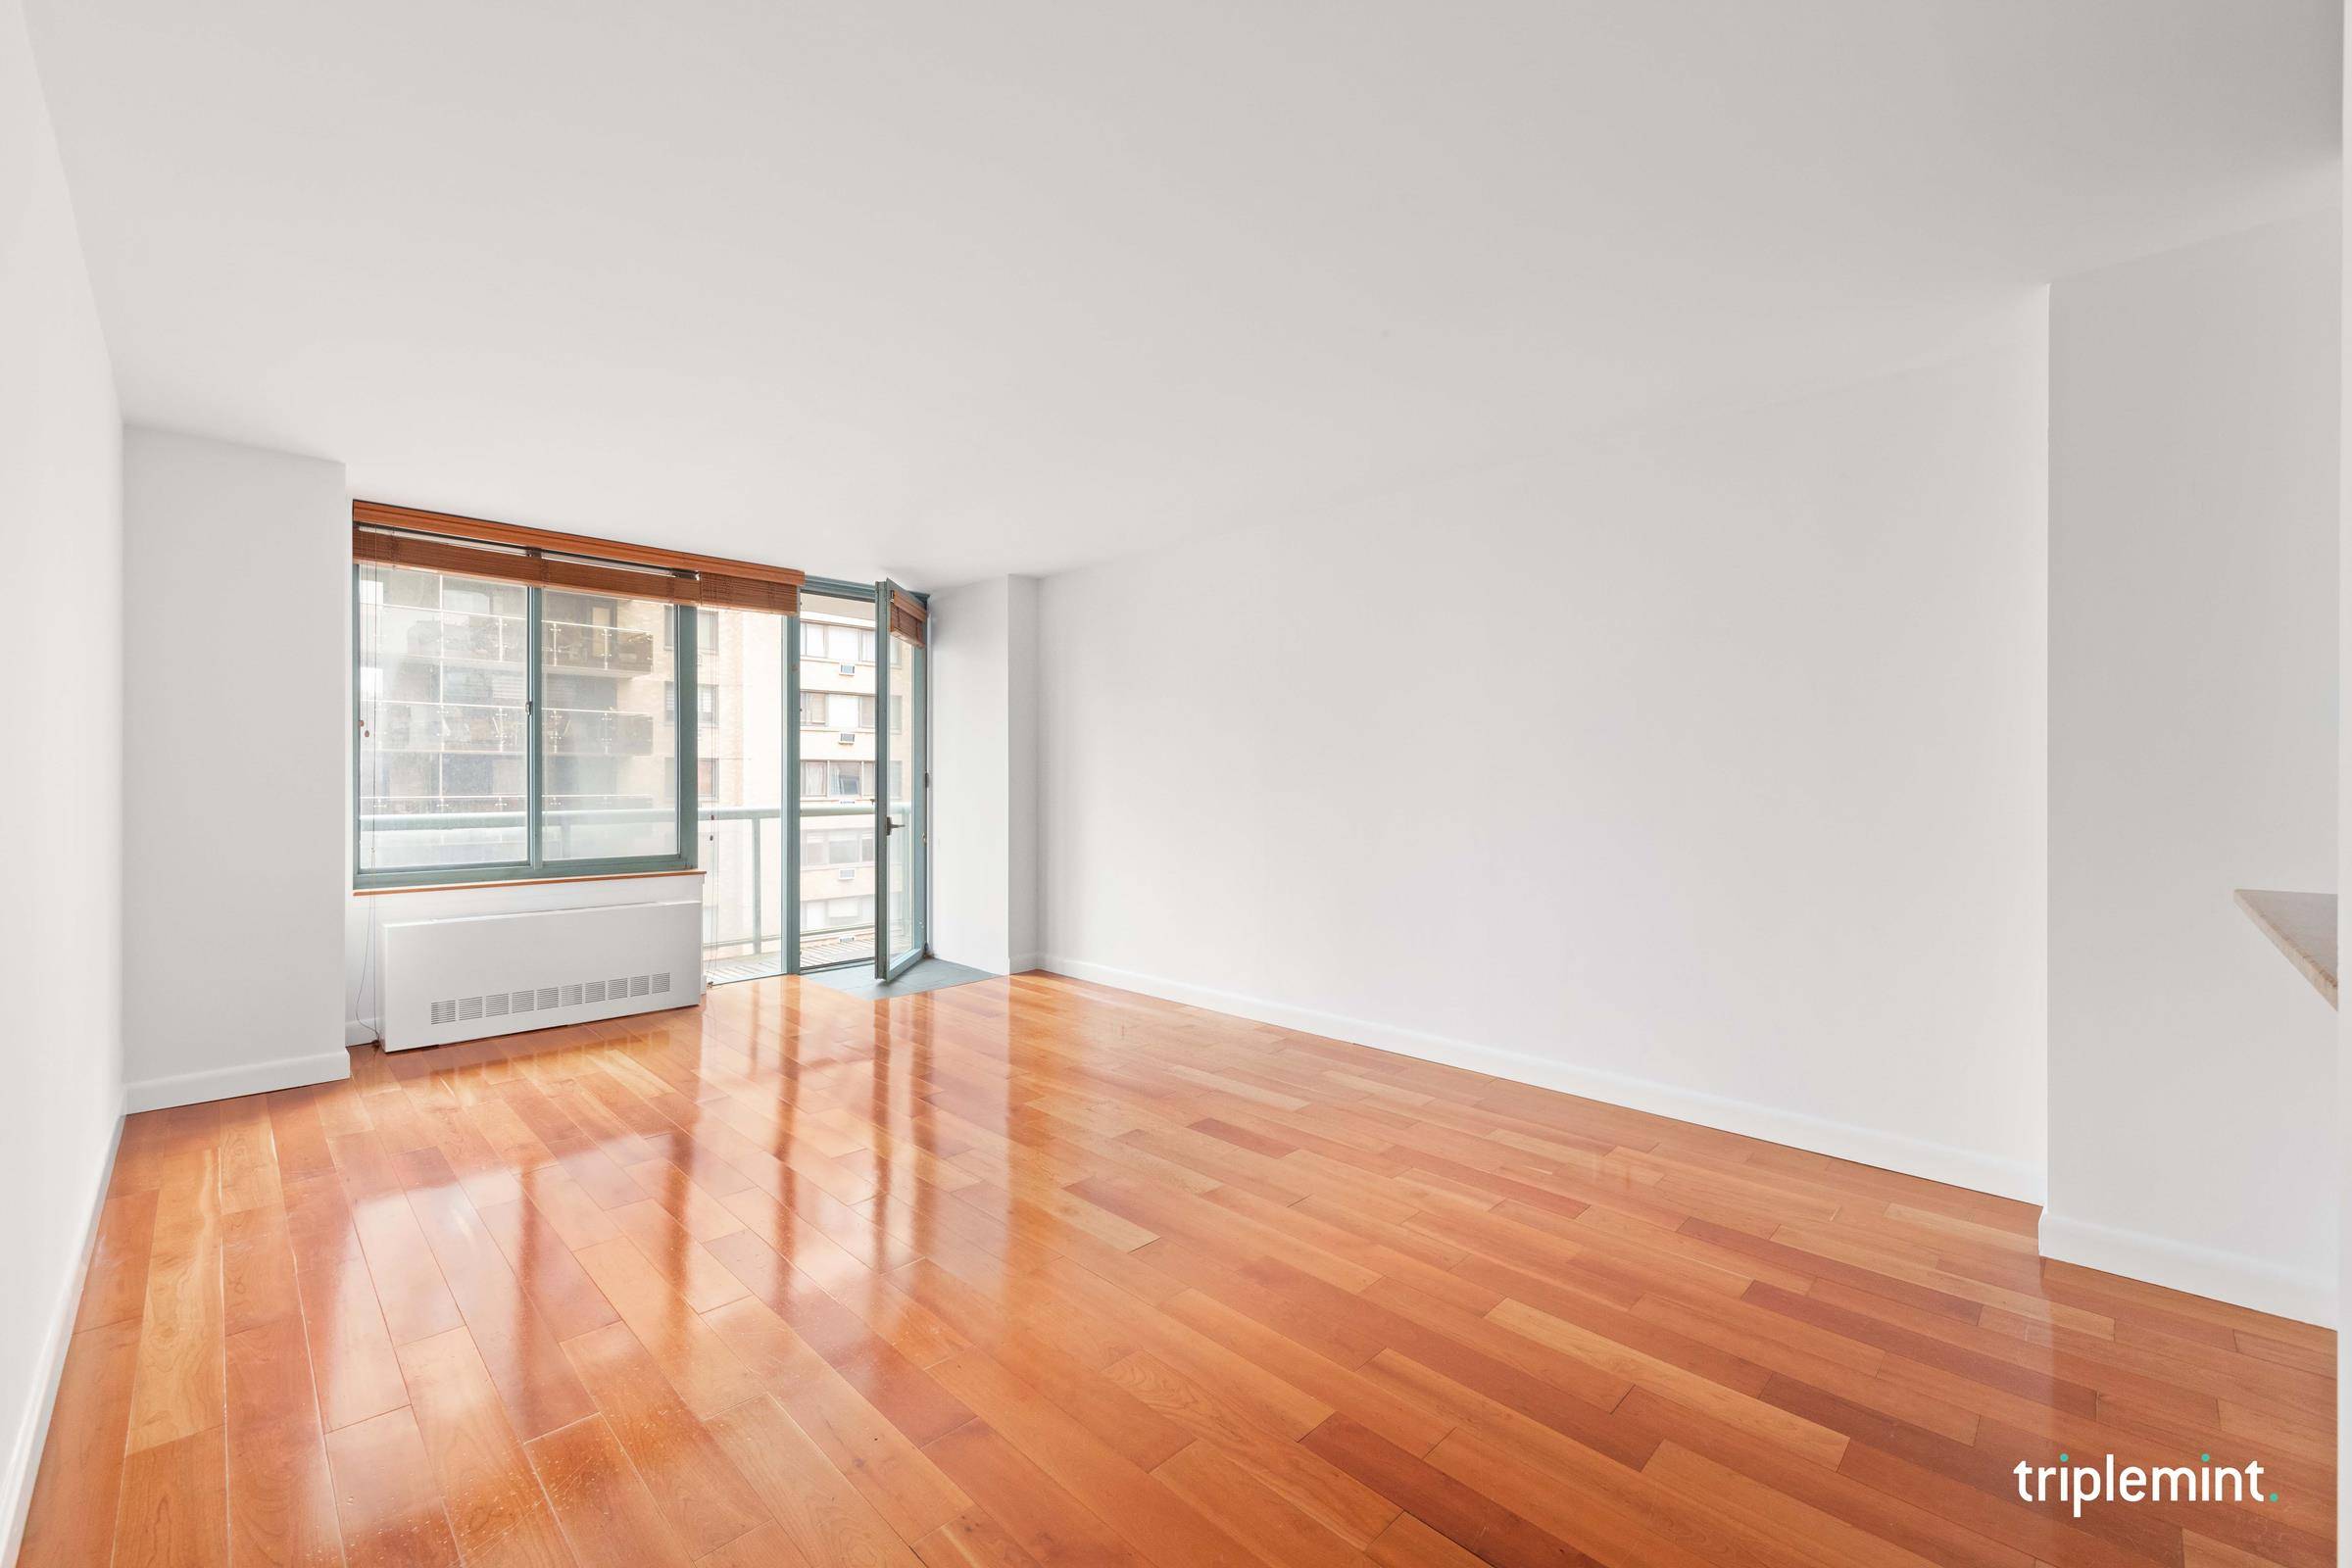 SUN DRENCHED SPACIOUS 1 BEDROOM WITH A PRIVATE BALCONY IS SURE TO IMPRESS.